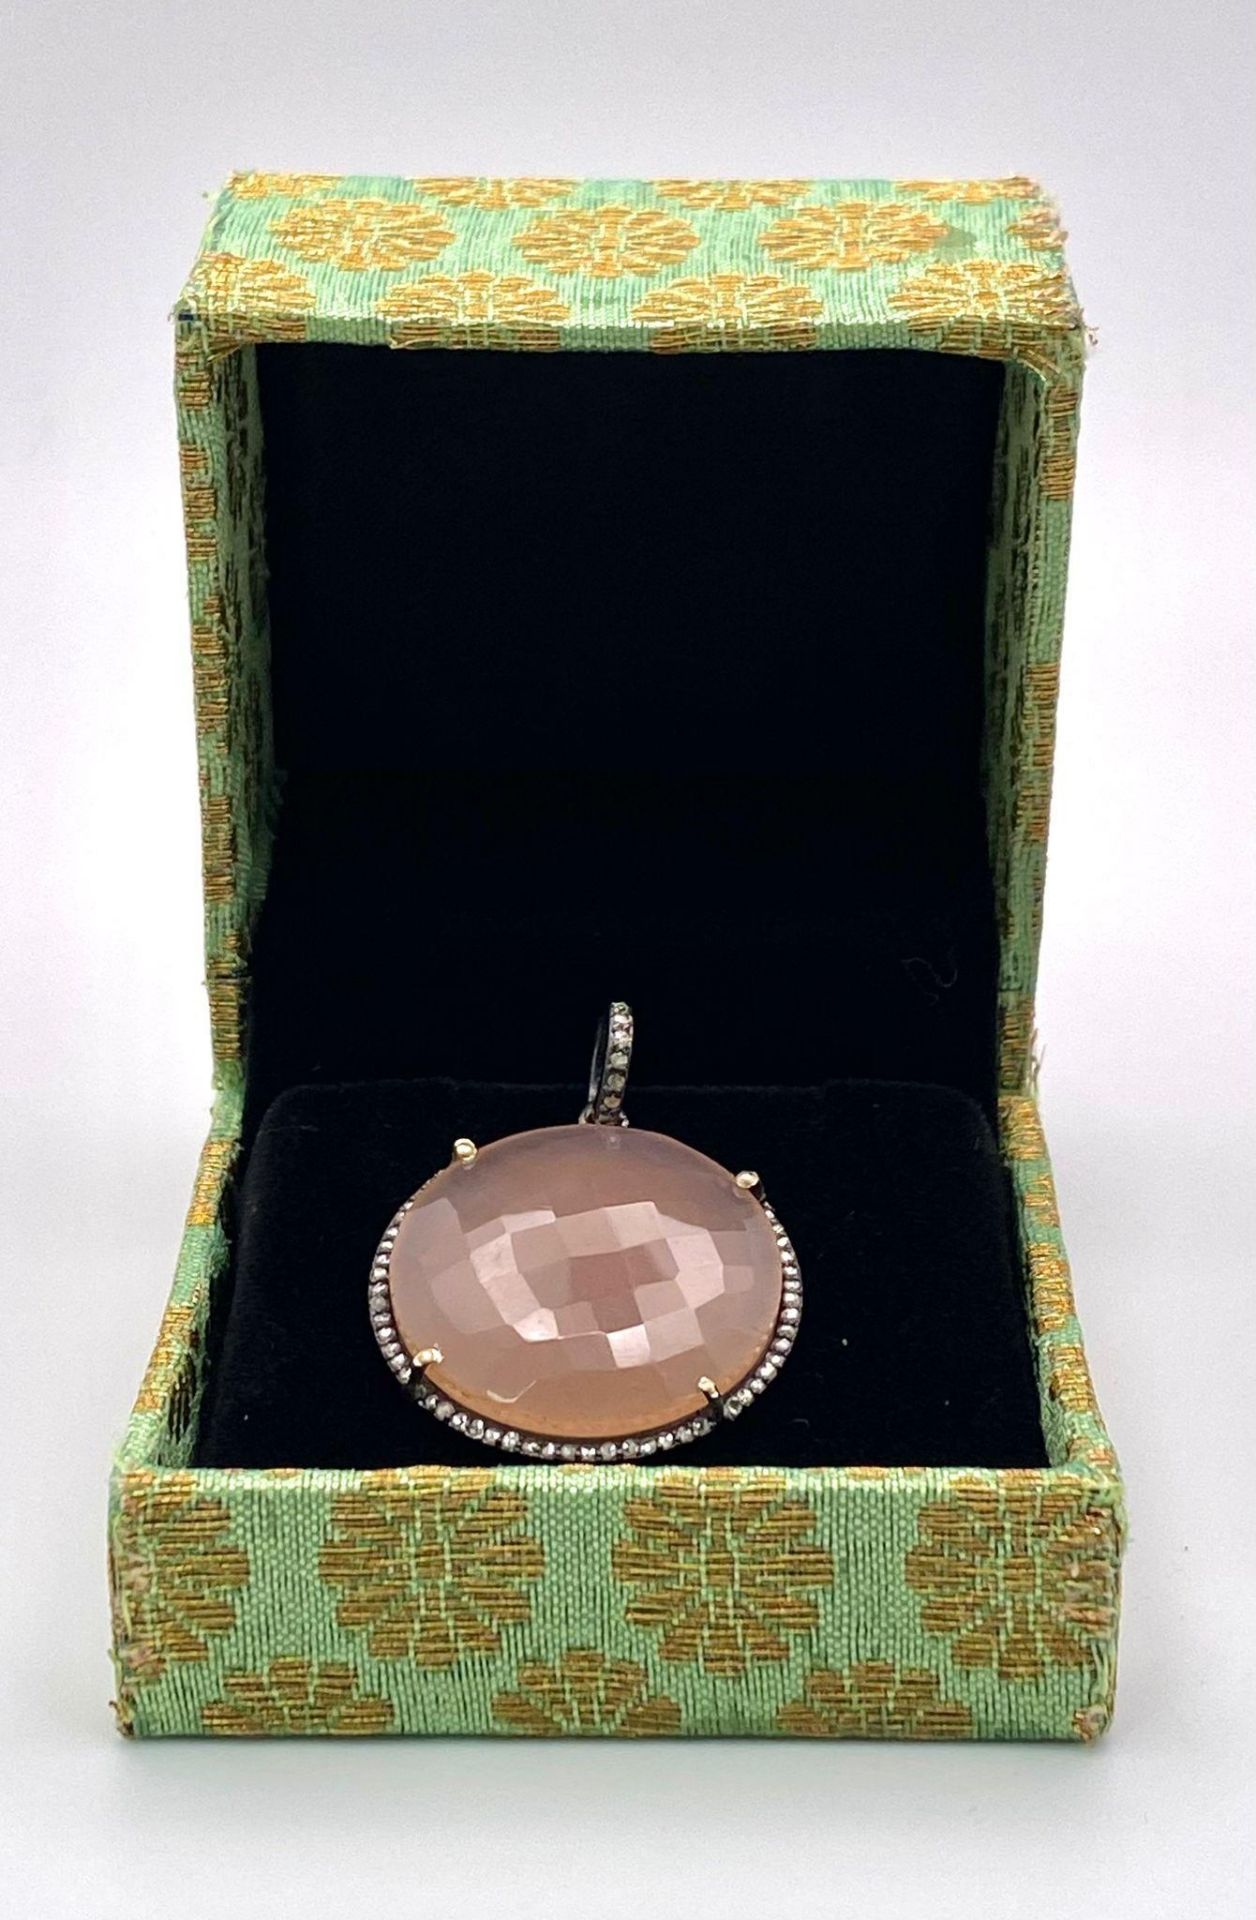 A Circular Rose Quartz and Diamonds Pendant. Faceted rose quartz cabochon with a diamond halo and - Image 6 of 9